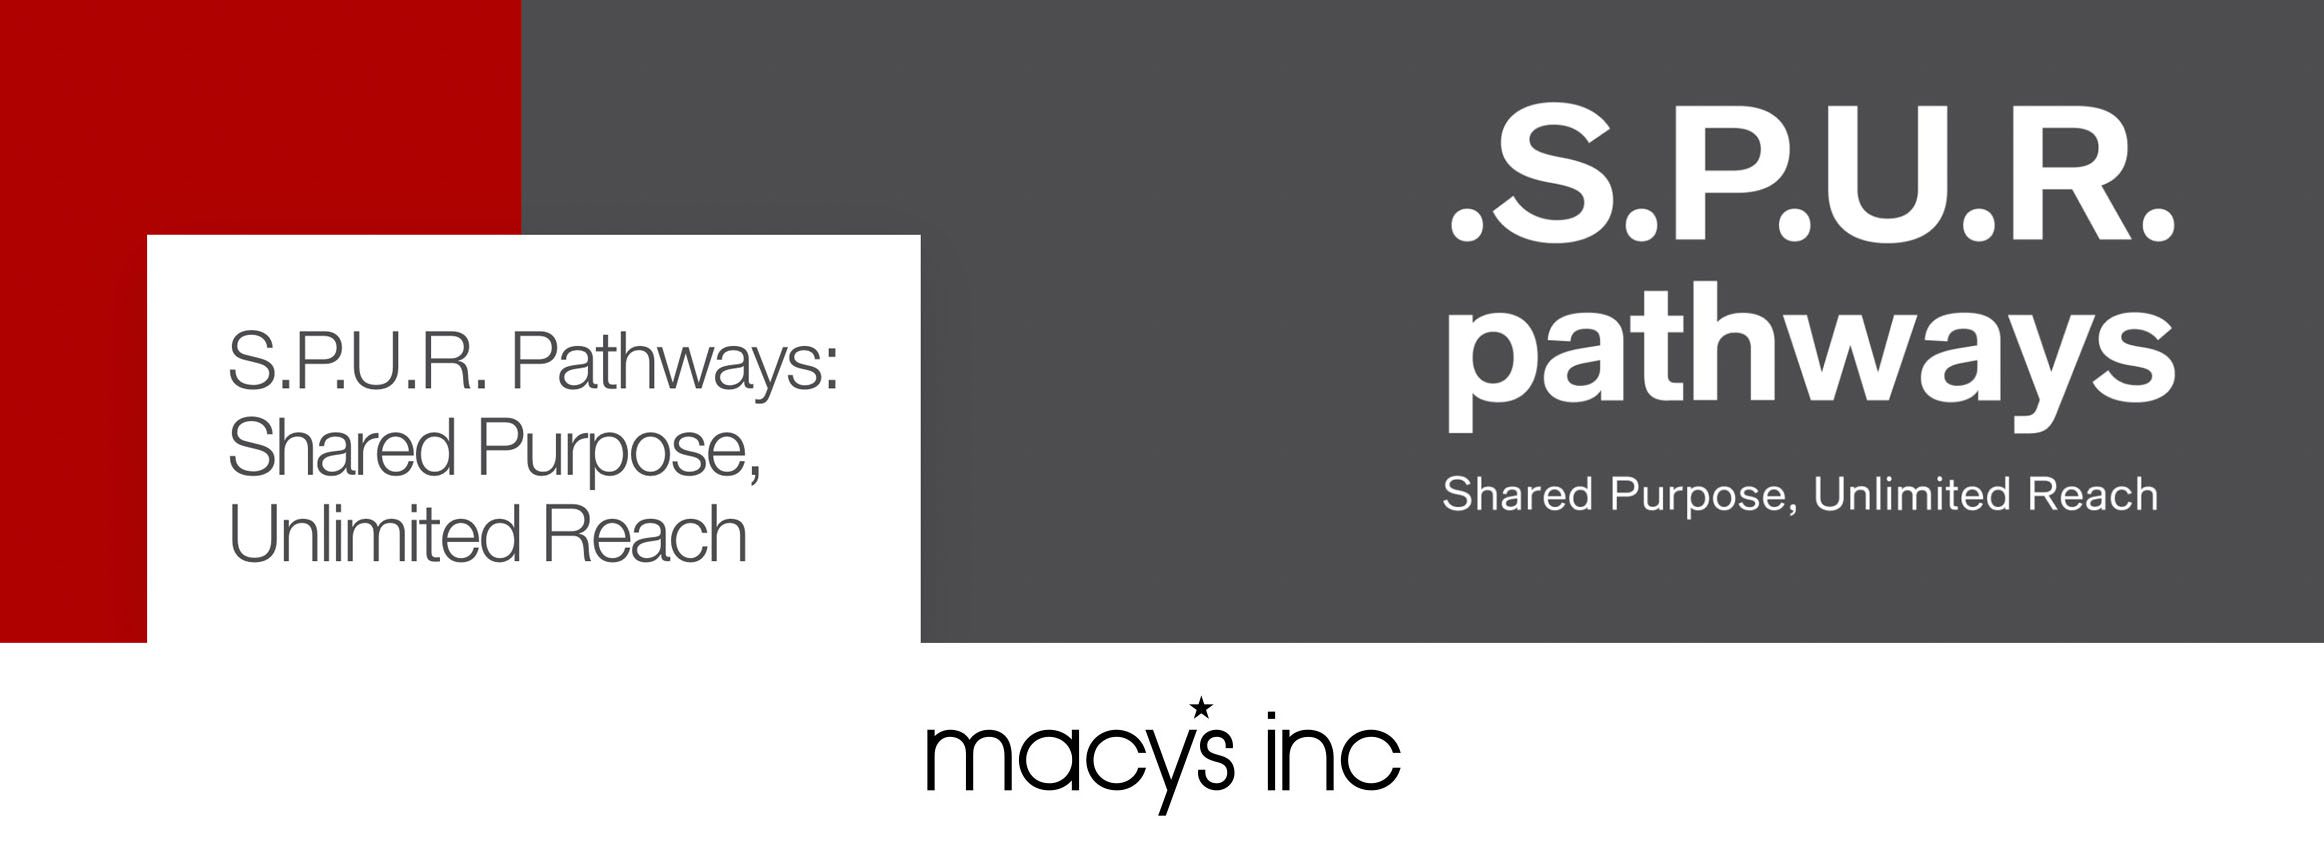 Macy’s, Inc. Advances Mission Every One Commitment with S.P.U.R. Pathways: Shared Purpose, Unlimited Reach - A Catalyst for Underrepresented Business Growth